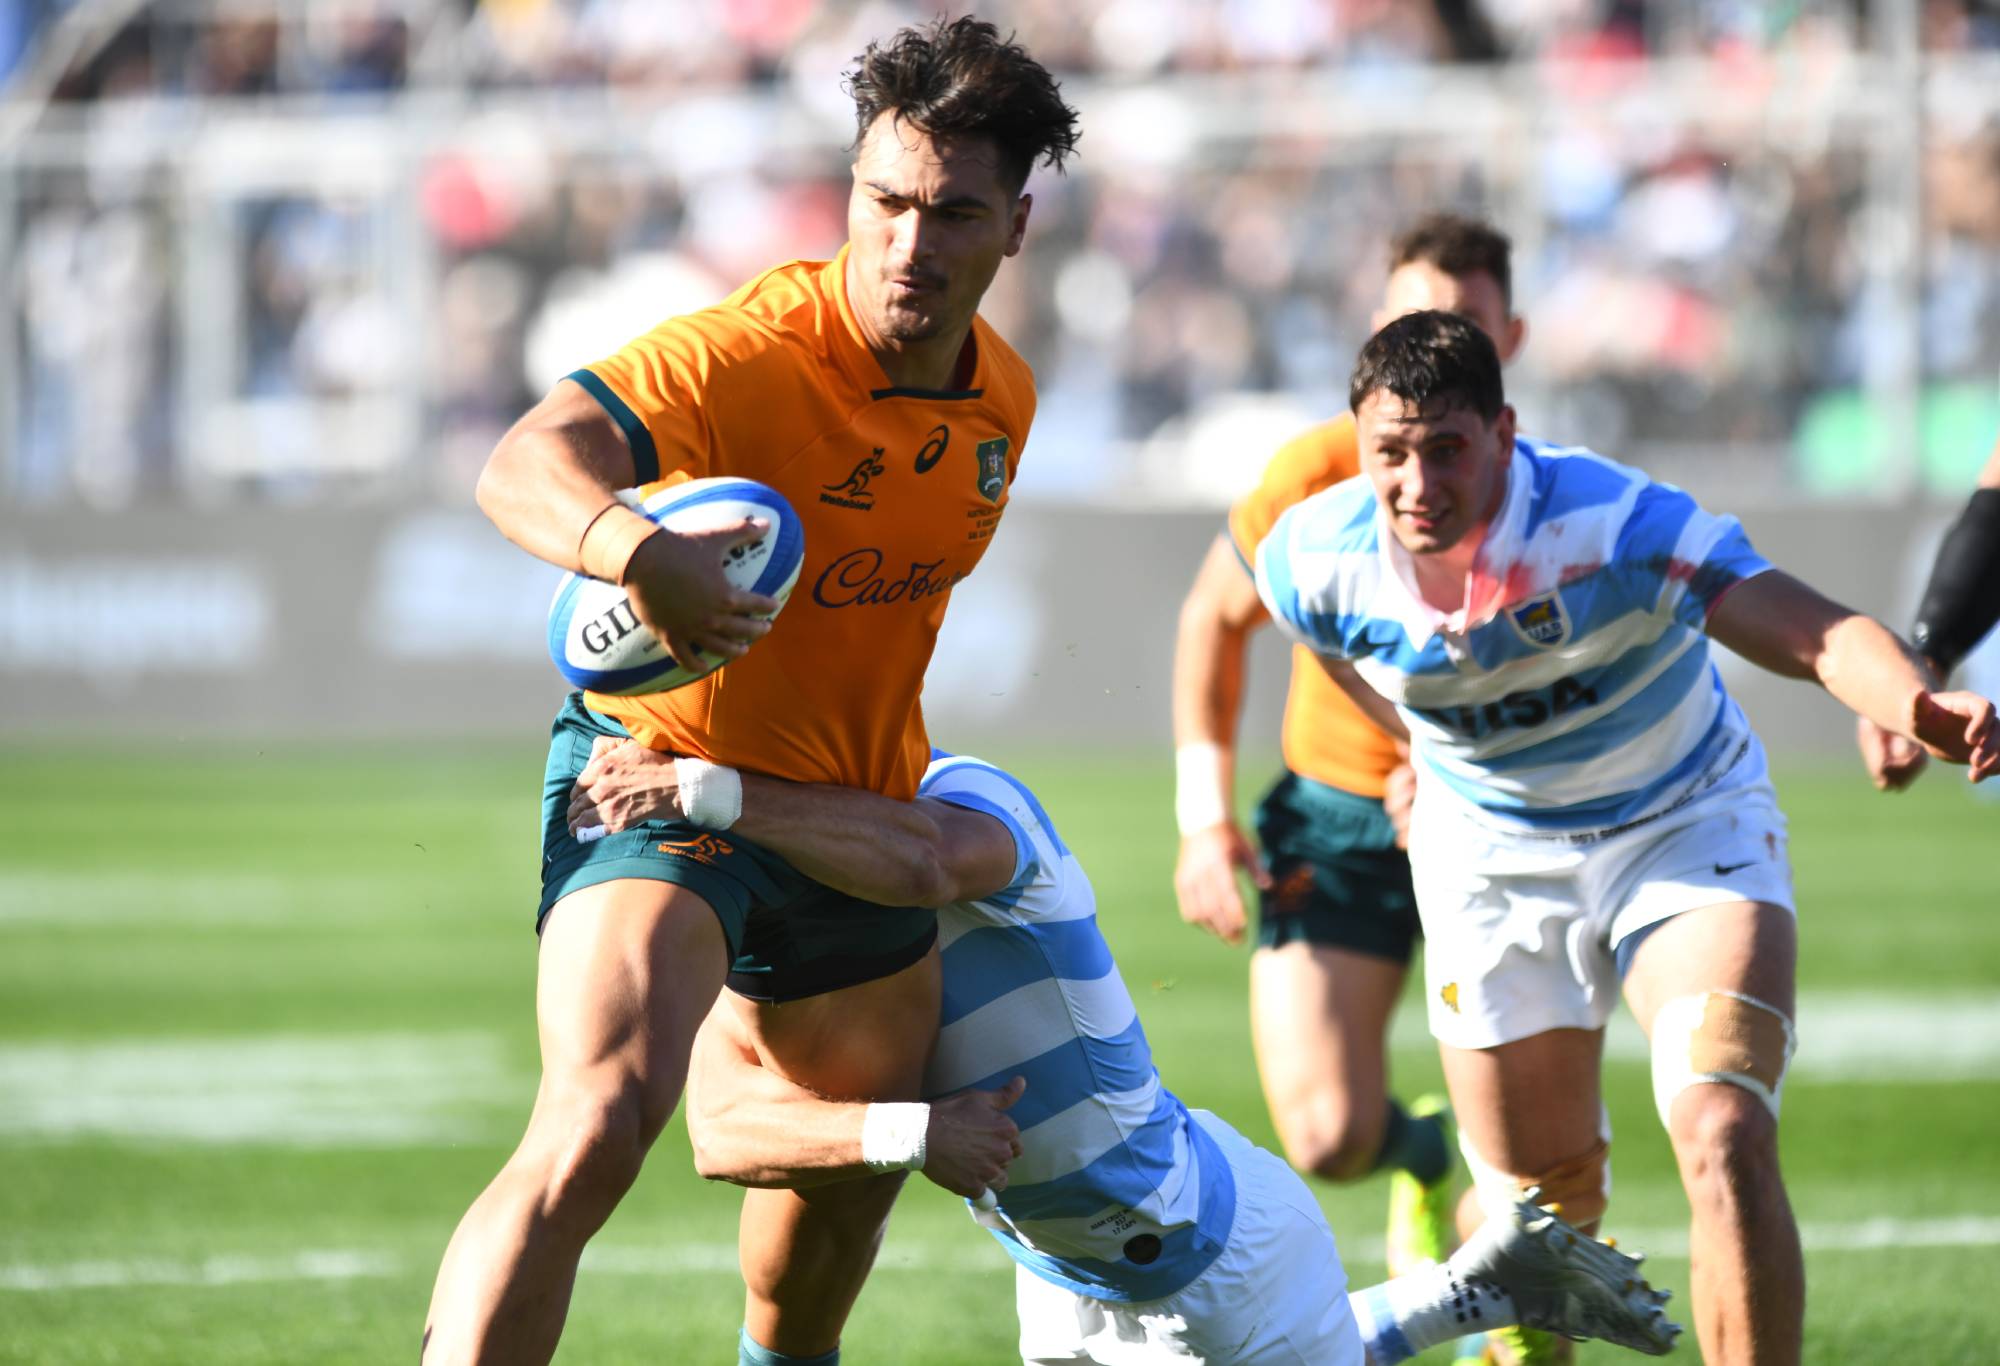 Jordan Petaia of Australia attempts to avoid a tackle during a Rugby Championship match between Argentina Pumas and Australian Wallabies at San Juan del Bicentenario Stadium on August 13, 2022 in San Juan, Argentina. (Photo by Rodrigo Valle/Getty Images)